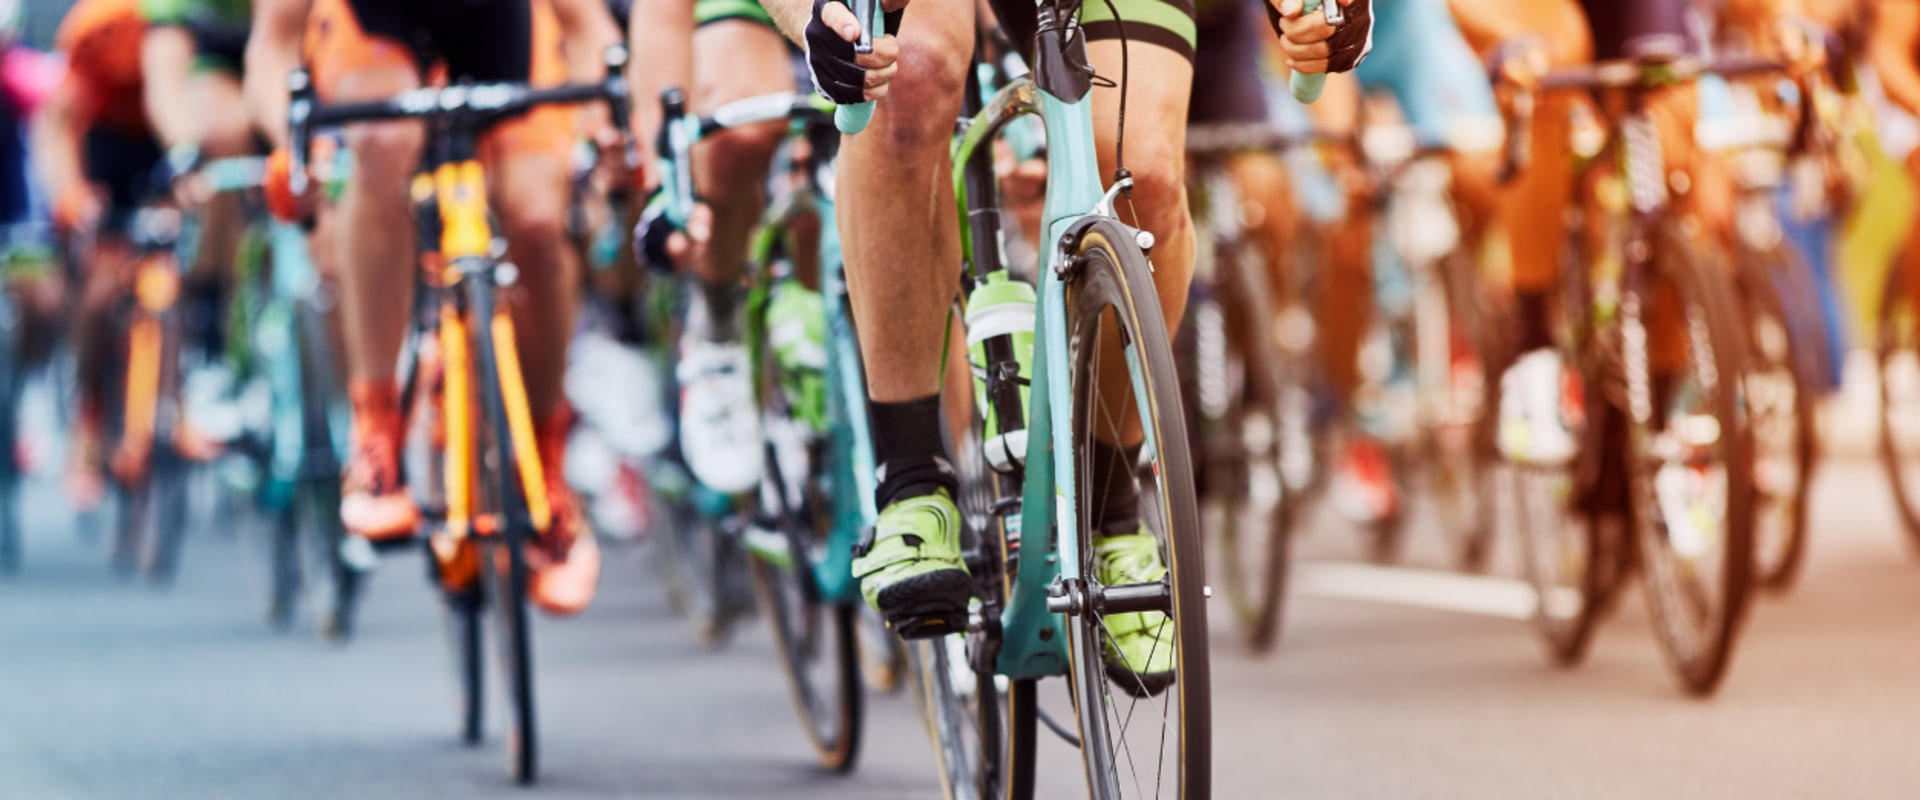 Cycling Events in Philadelphia: Where to Find Them